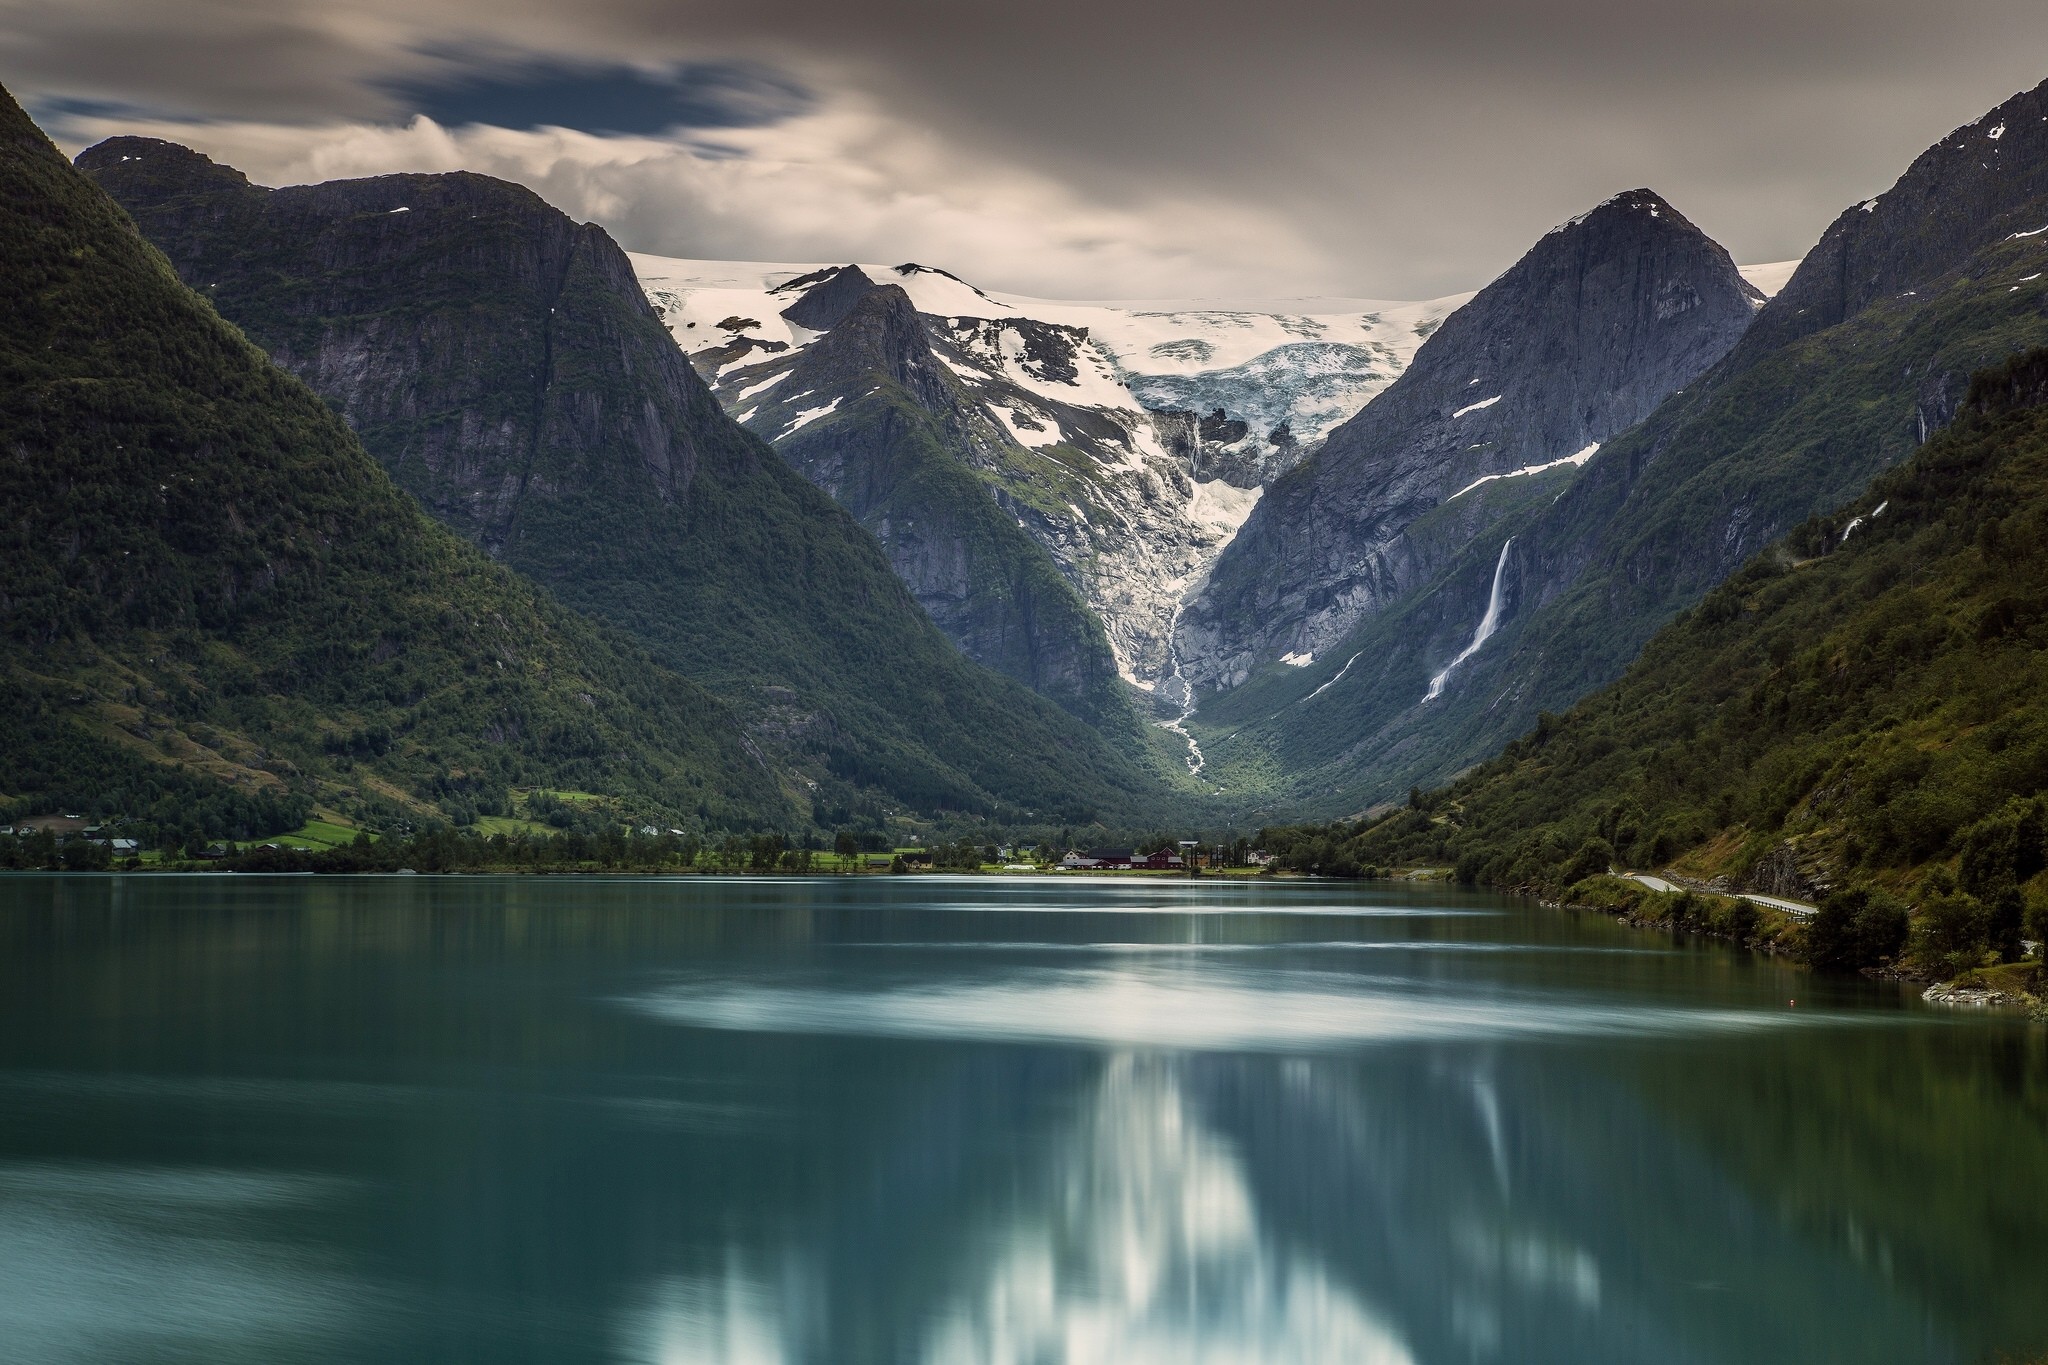 General 2048x1365 Norway glacier nature water mountains